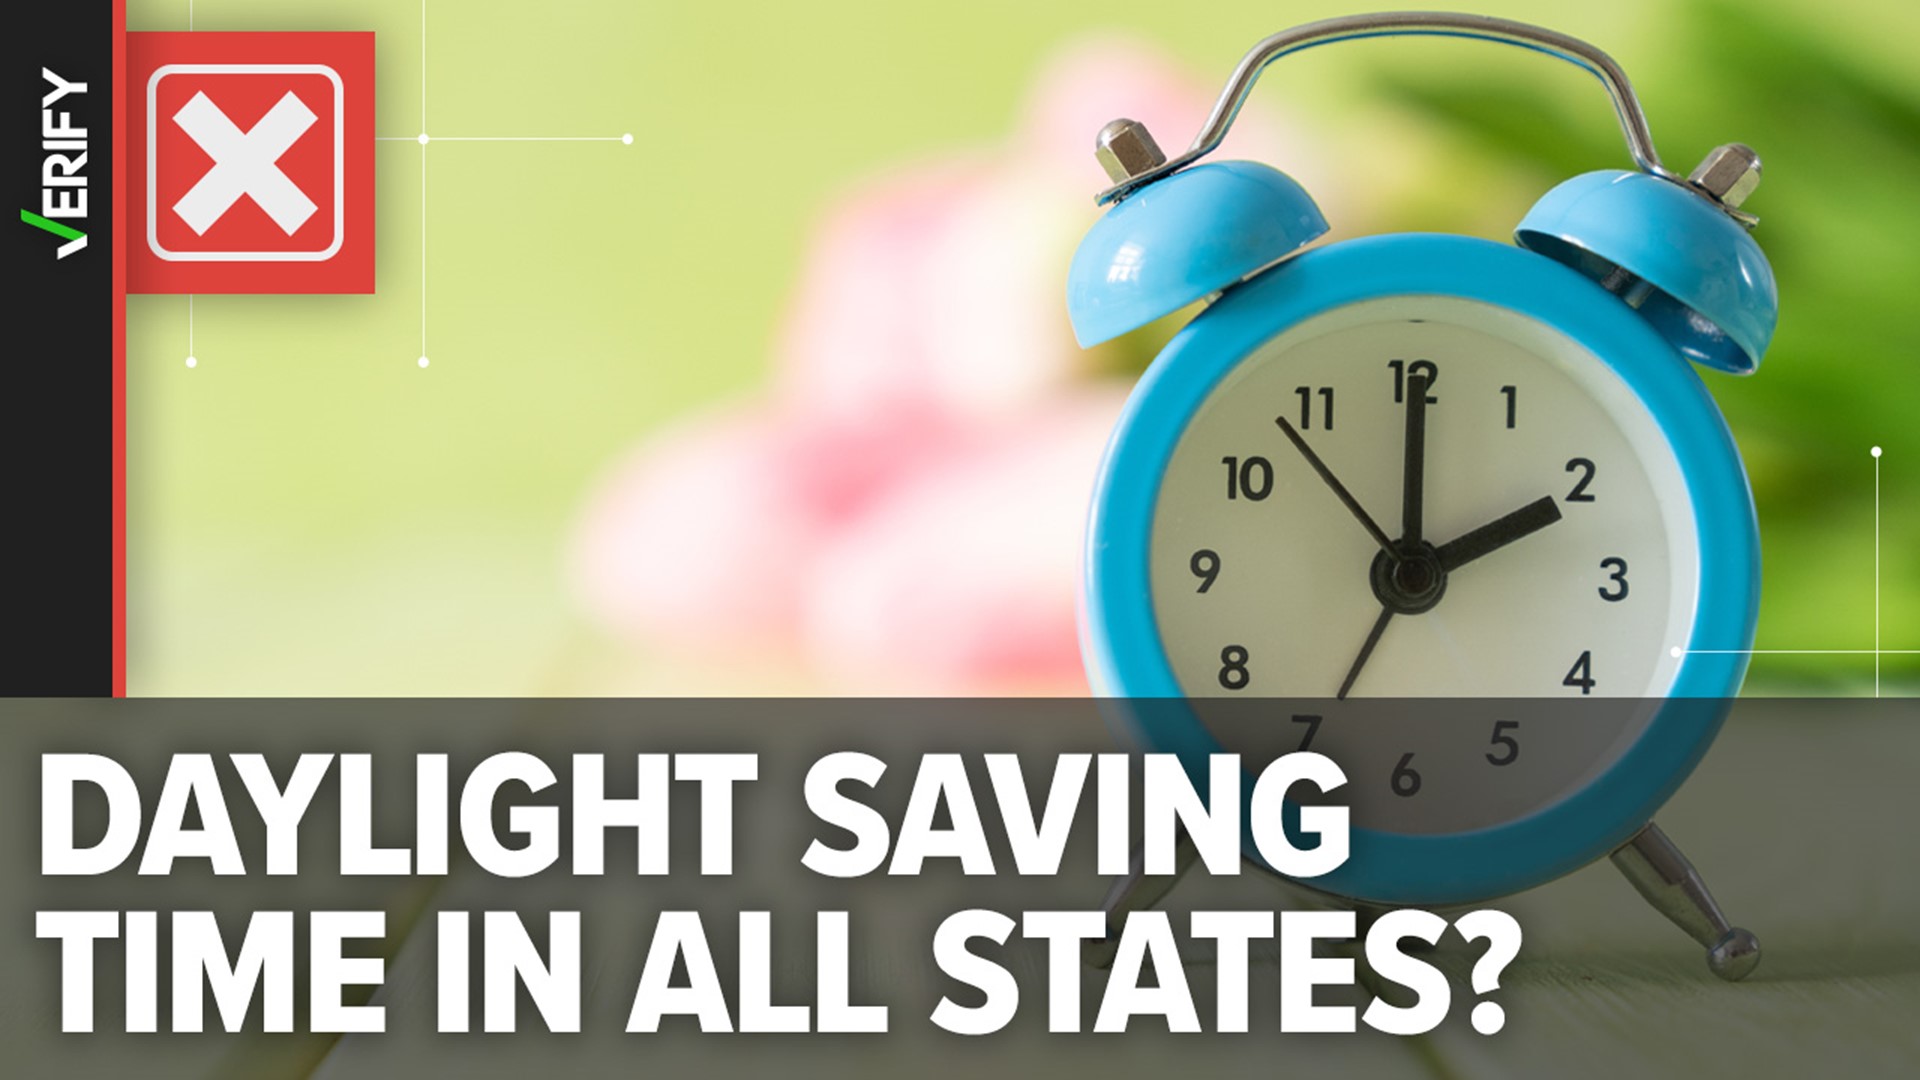 Two U.S. states do not turn their clocks back in November or spring forward every March.